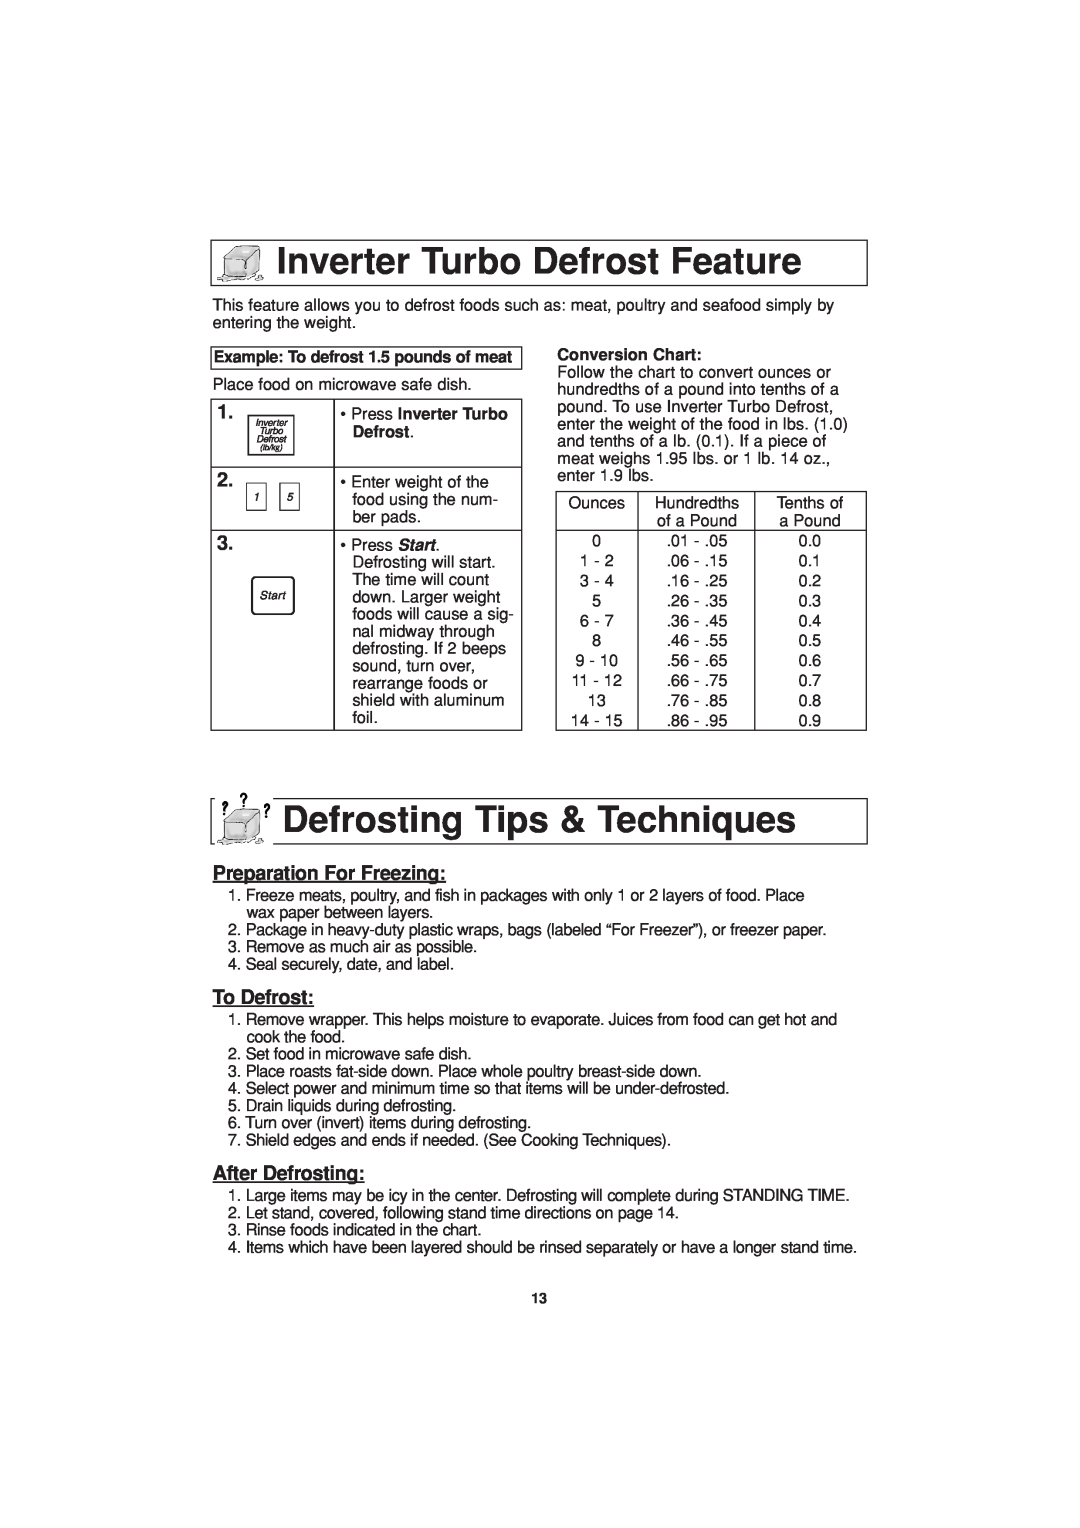 Panasonic NN-H614 Inverter Turbo Defrost Feature, Defrosting Tips & Techniques, Preparation For Freezing, To Defrost 